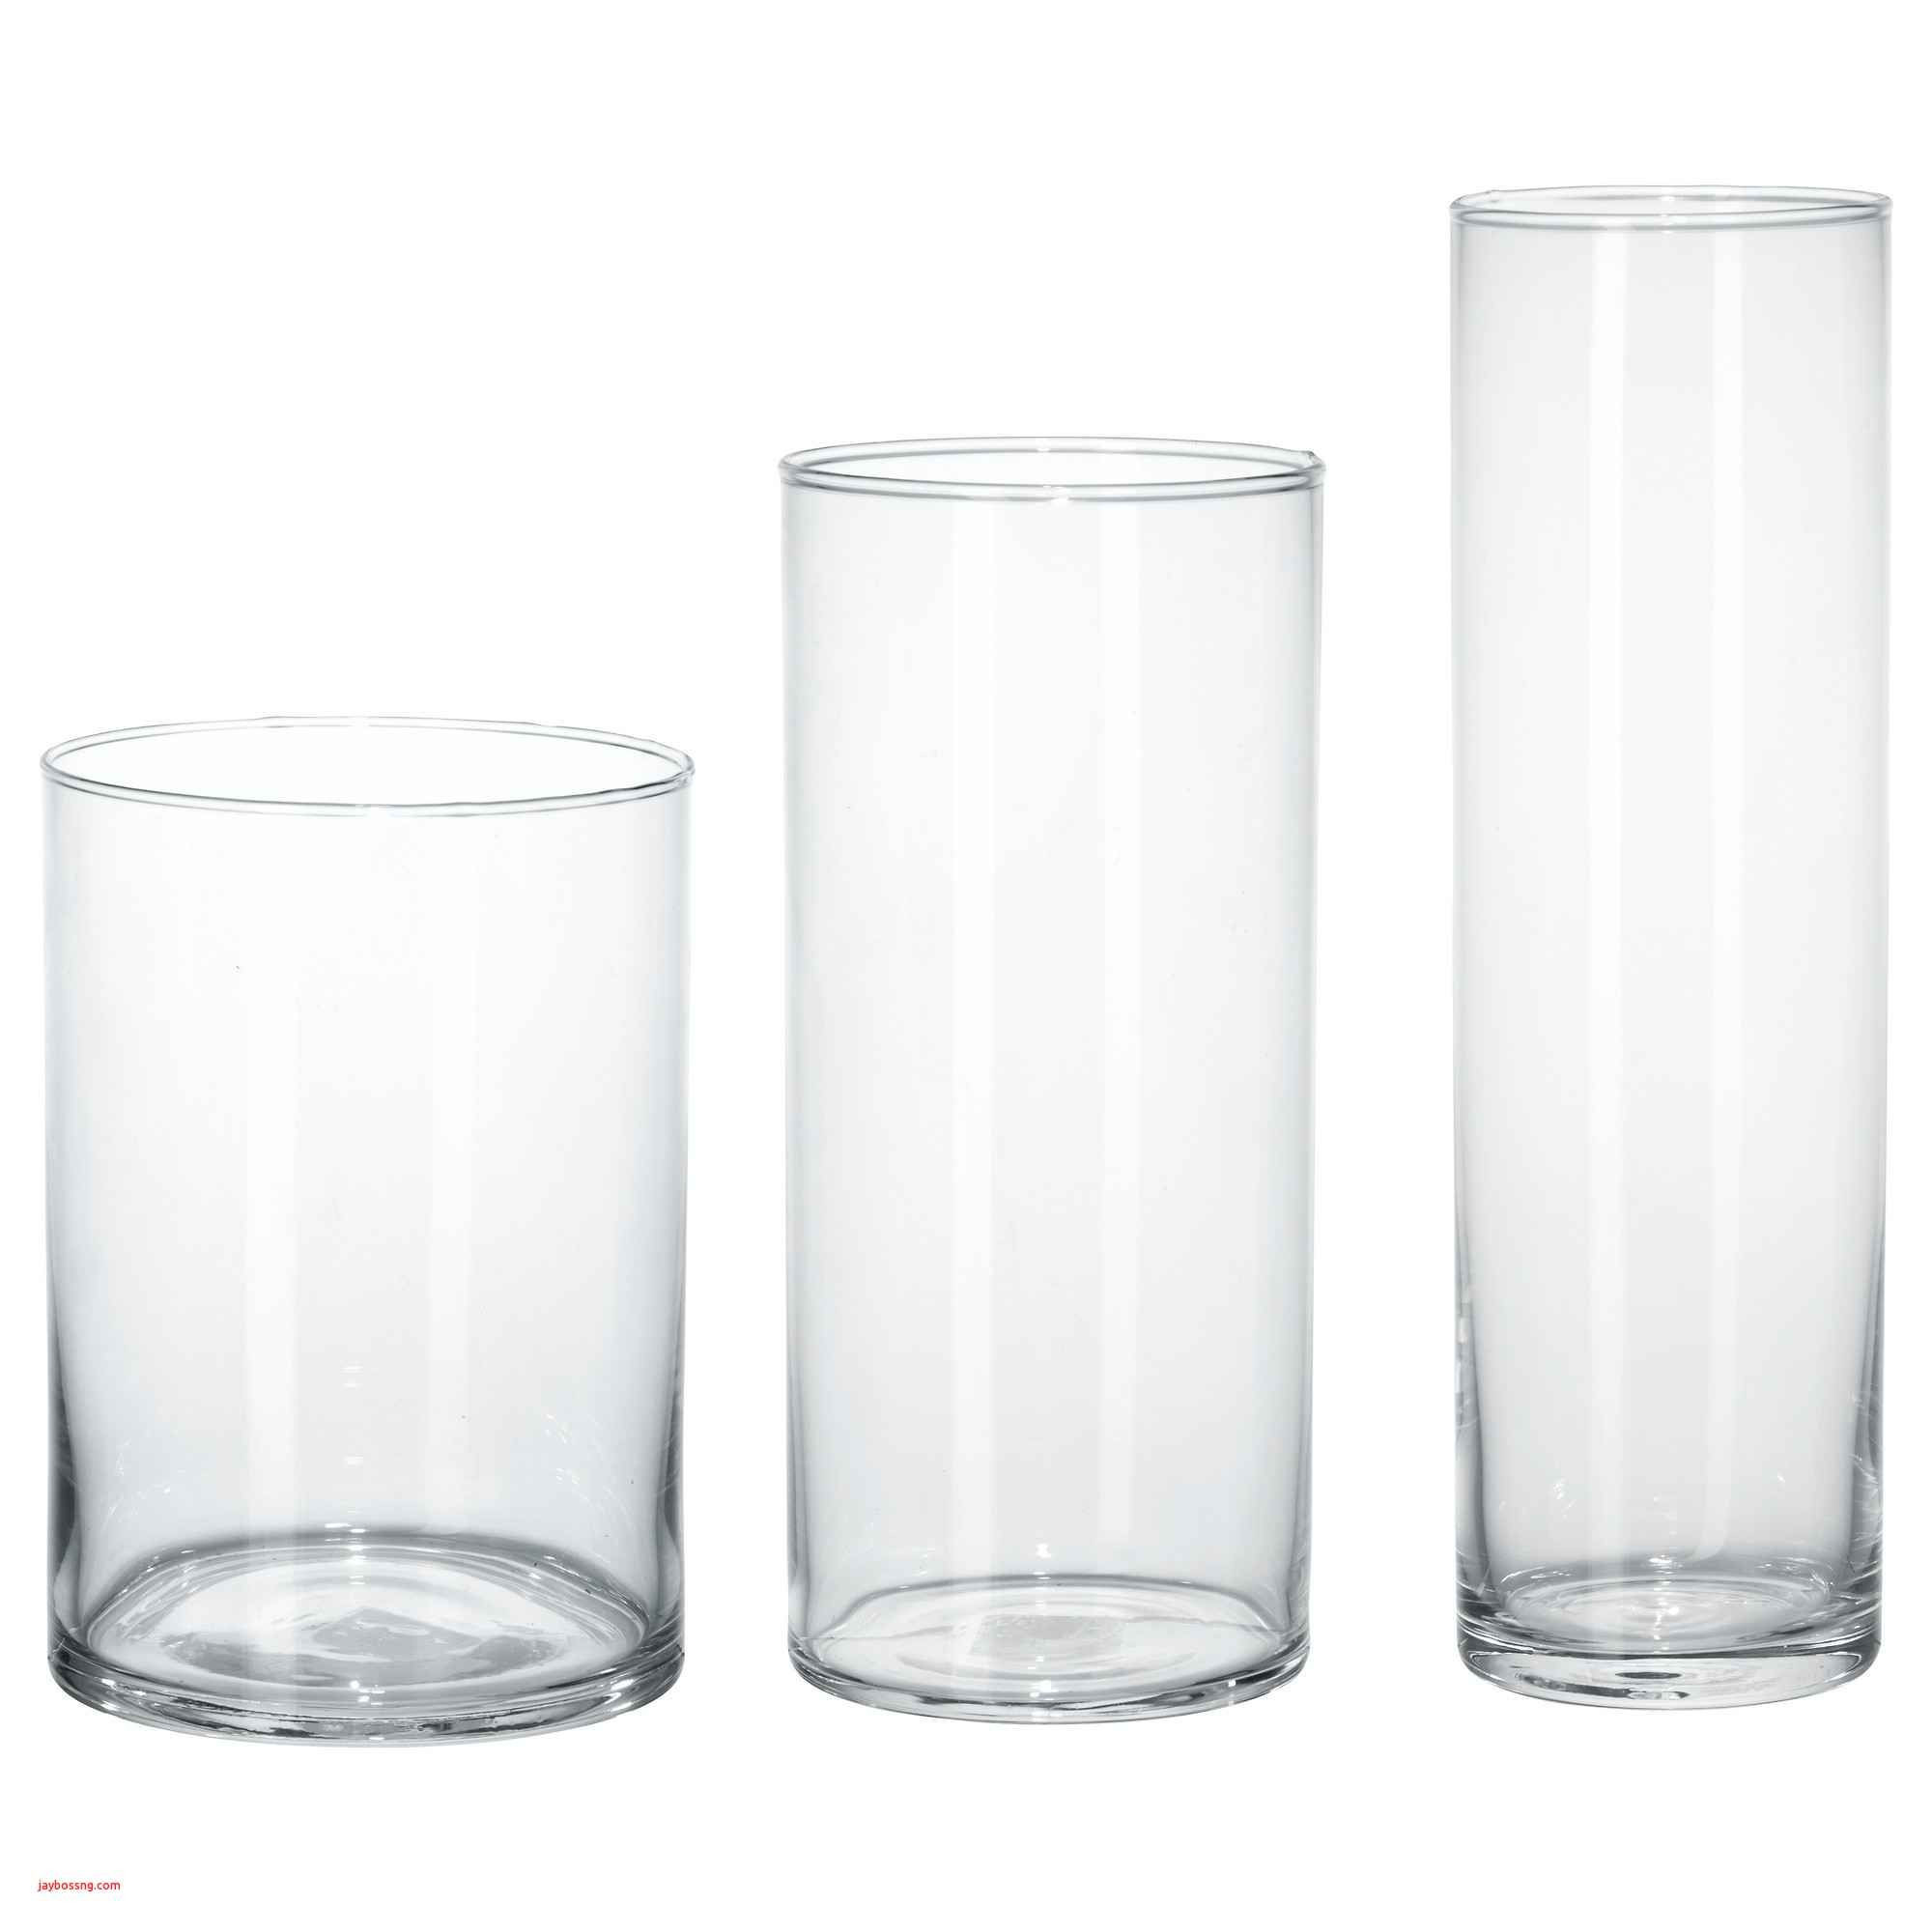 19 Nice Small Clear Glass Bud Vases 2024 free download small clear glass bud vases of white glass vase elegant ikea white table created pe s5h vases ikea pertaining to white glass vase elegant ikea white table created pe s5h vases ikea vase i 0d